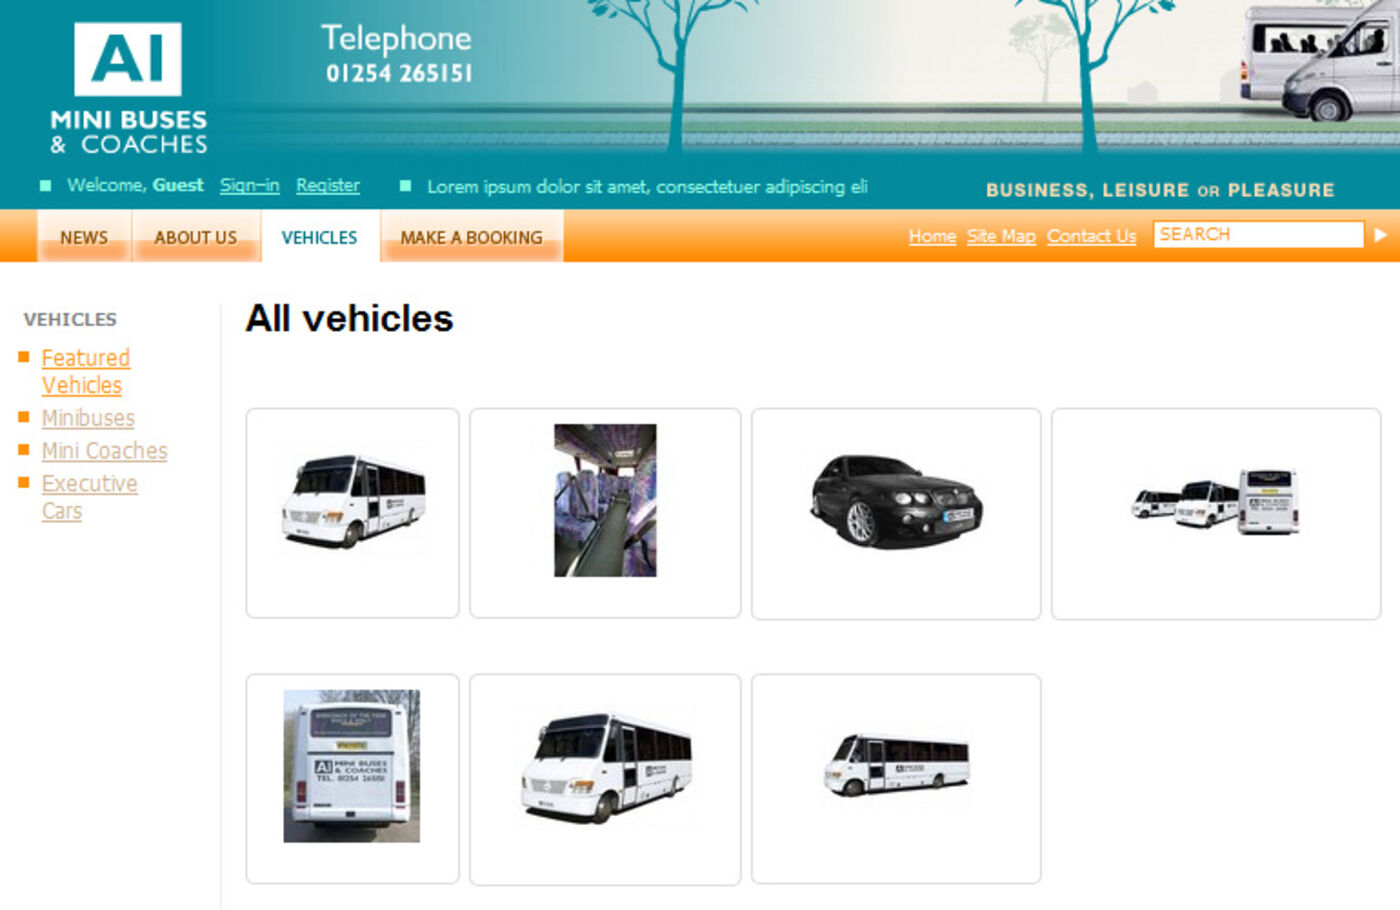 A1 Minibuses and Coaches Vehicles - A1 Minibuses and Coaches